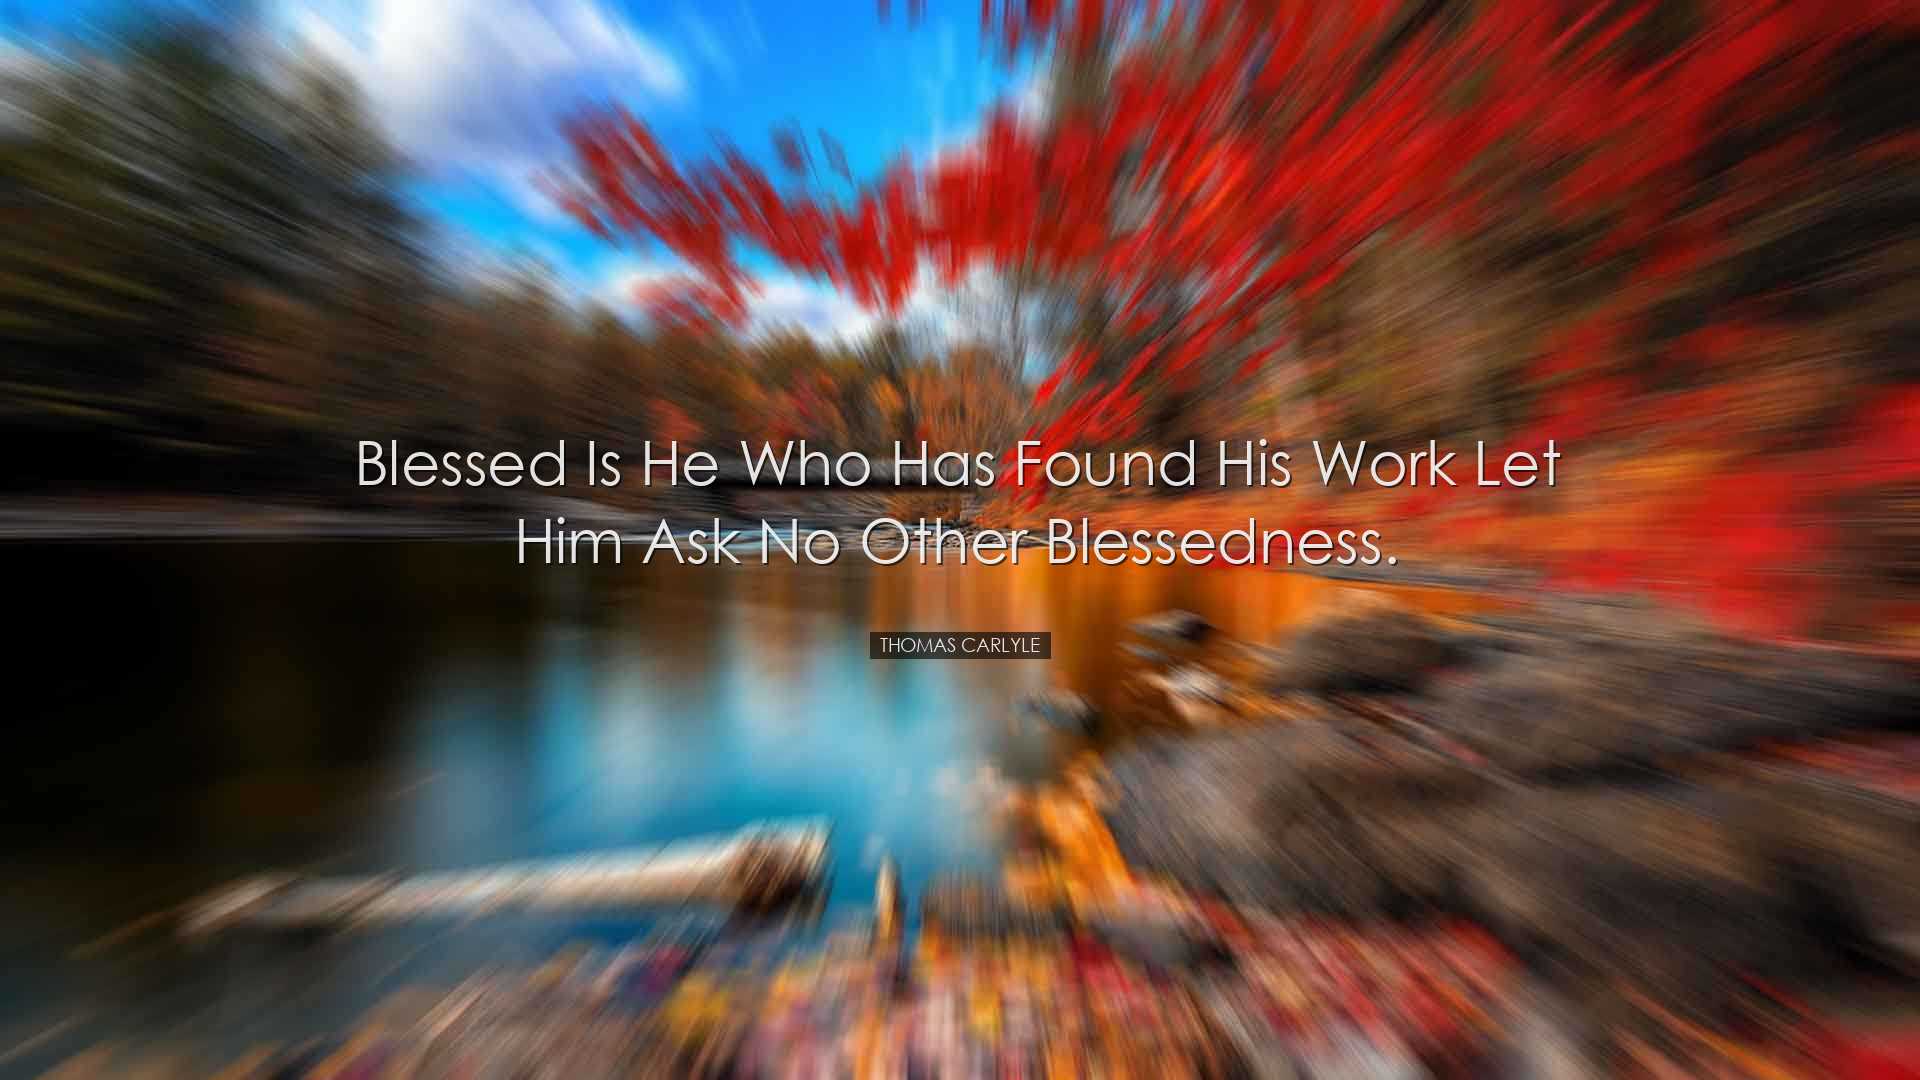 Blessed is he who has found his work let him ask no other blessedn